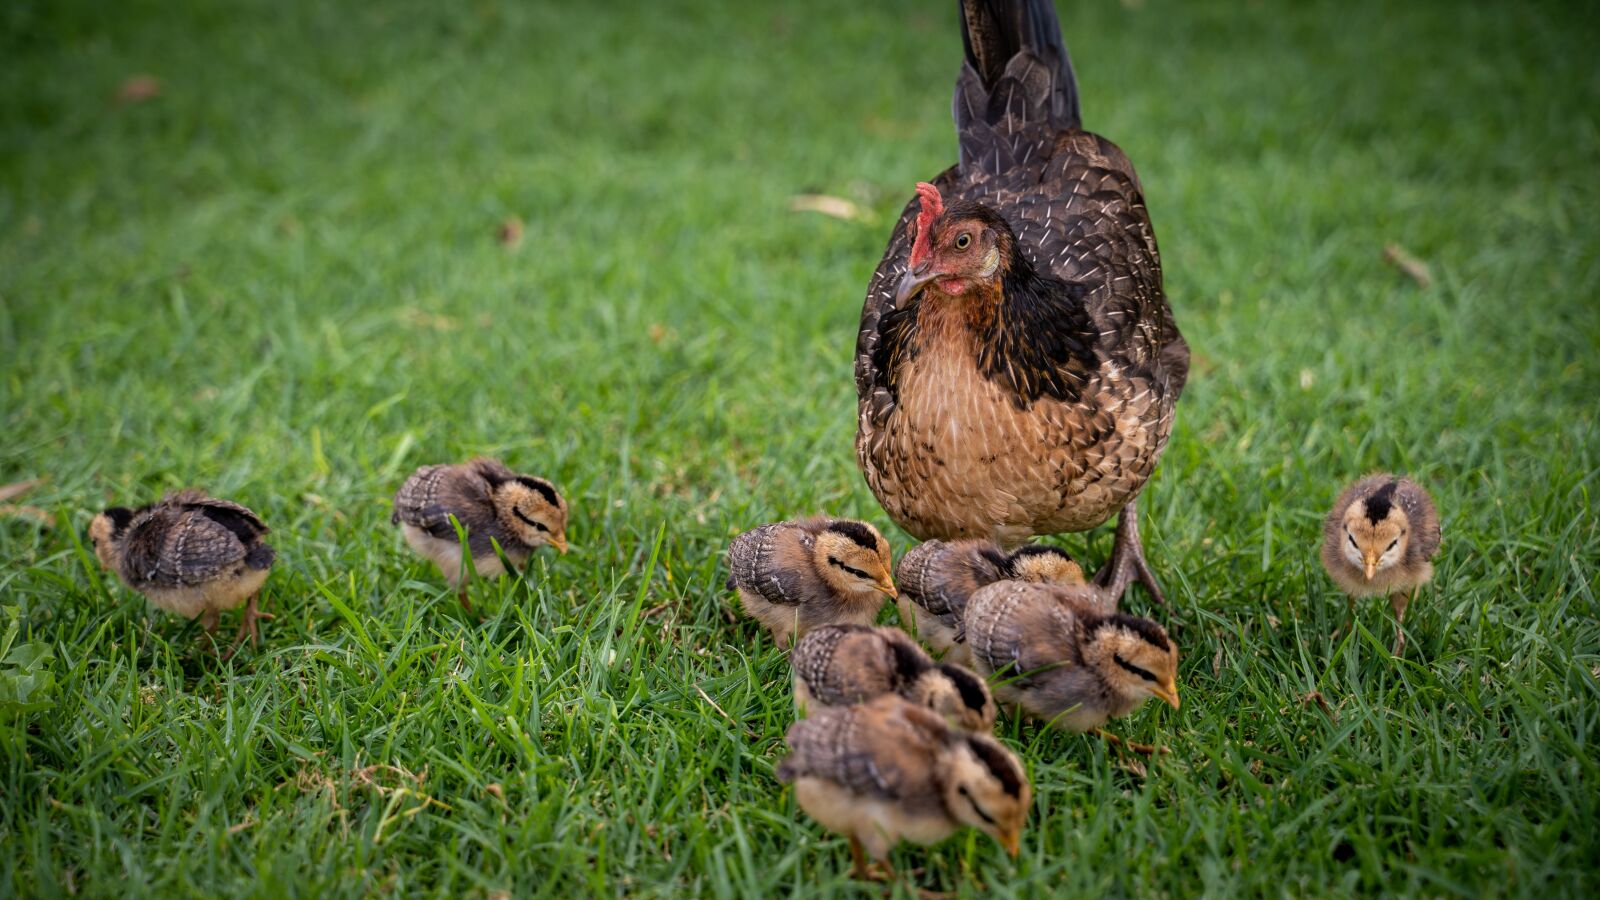 Sony a7 III sample photo. Chicken, chick, chicks photography